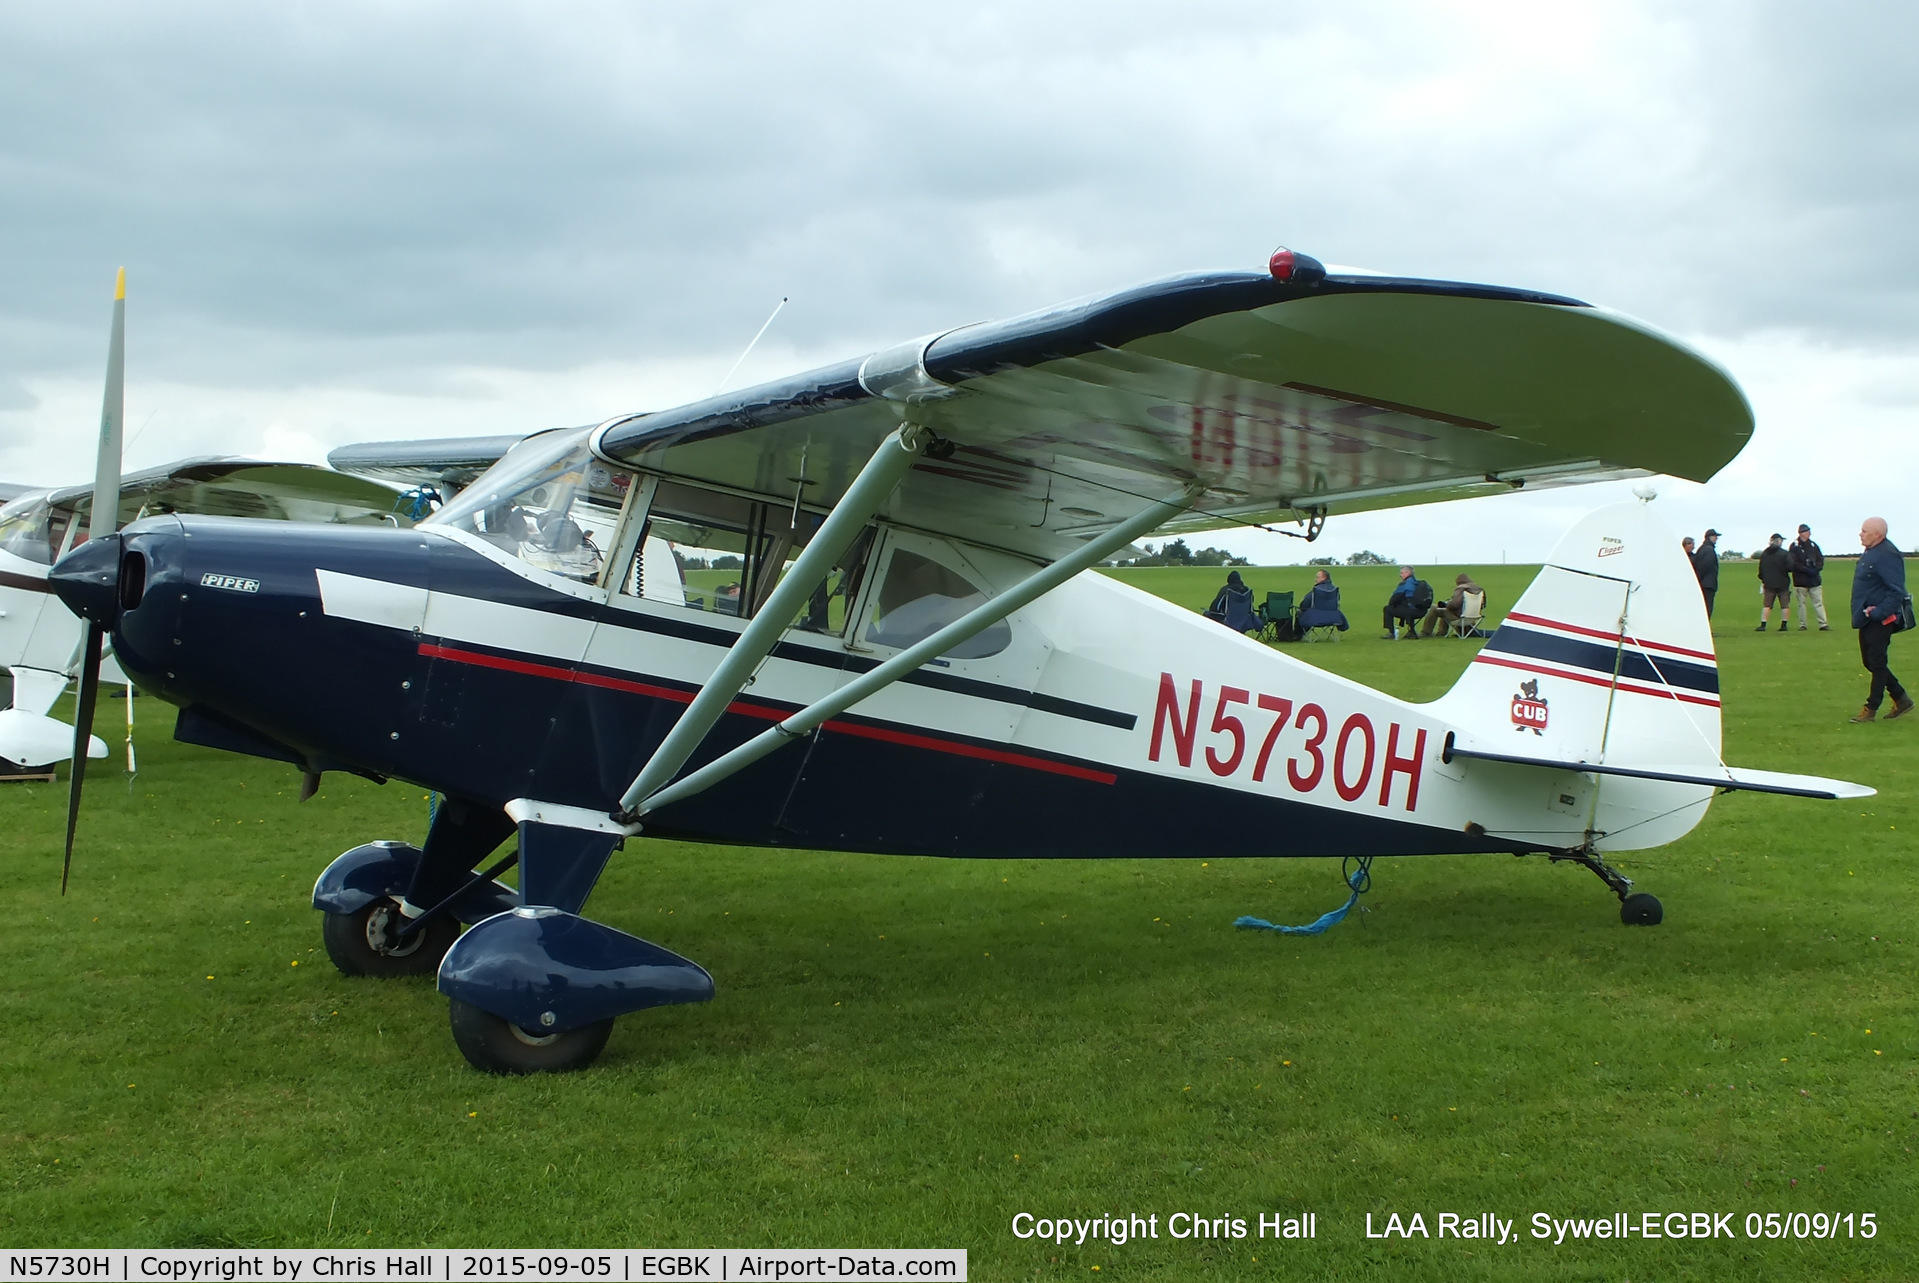 N5730H, 1949 Piper PA-16 Clipper C/N 16-342, at the LAA Rally 2015, Sywell